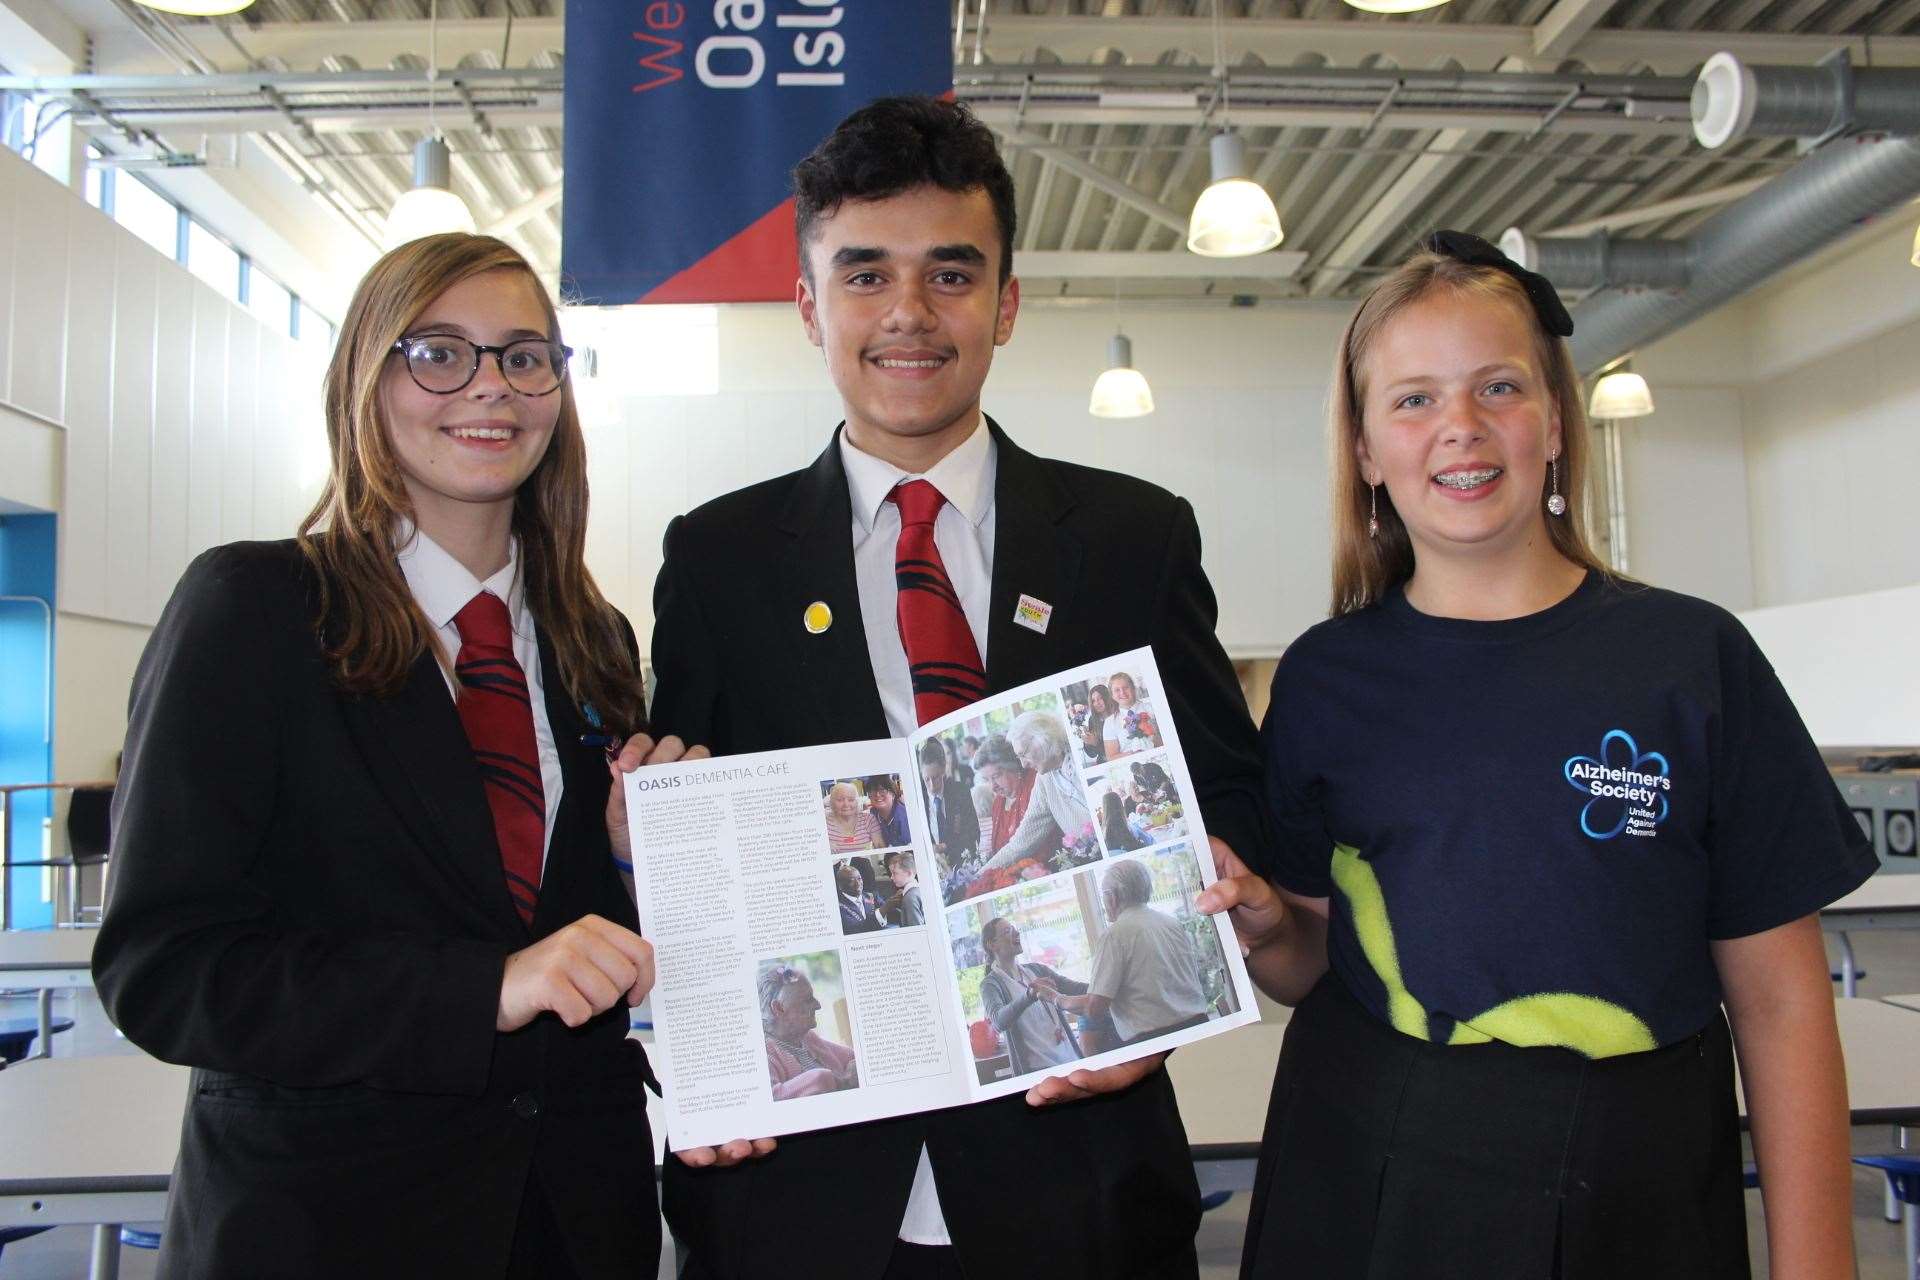 Oasis Academy students Sinead Hubbard, 14, (left) Emre Huseyin, 14, and Lucy Brightman-Stokes, 11, celebrate the Sheppey school's dementia cafe getting a double-page spread in the NHS 70-year anniversary souvenir magazine (7660433)